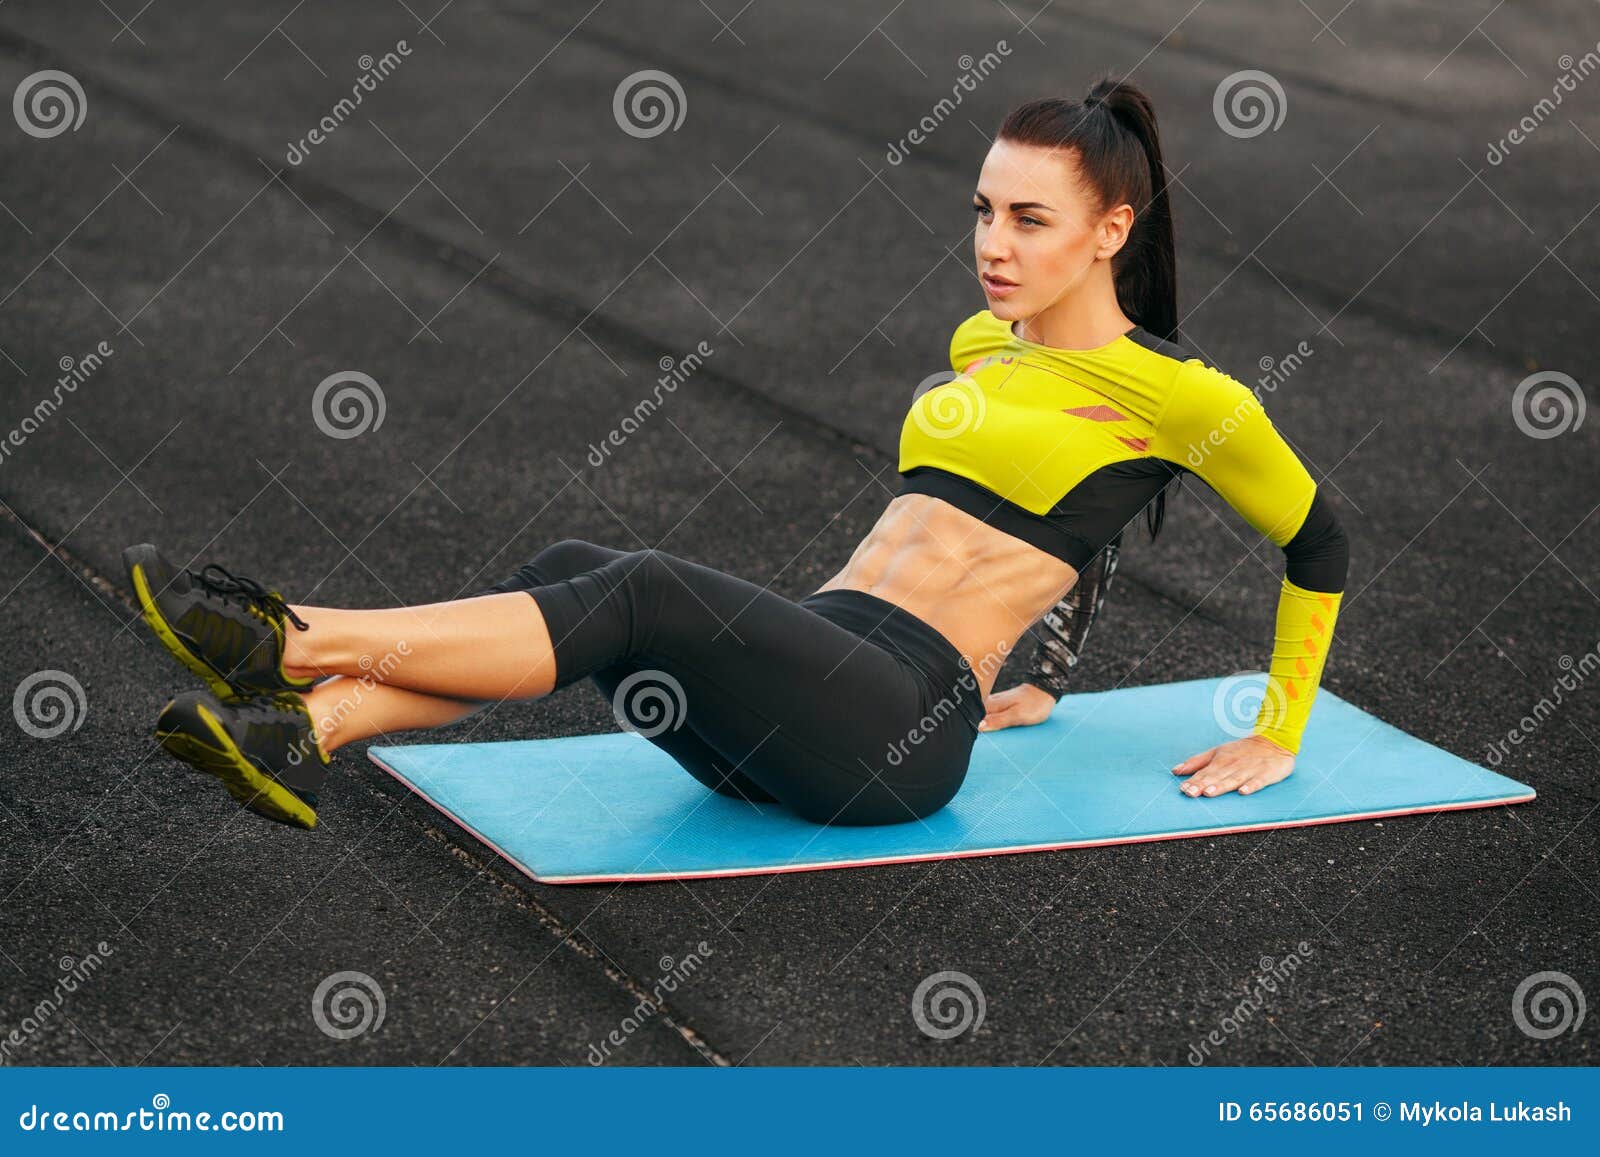 fitness woman doing sit ups in the stadium working out. sporty girl exercising abdominals, outdoor